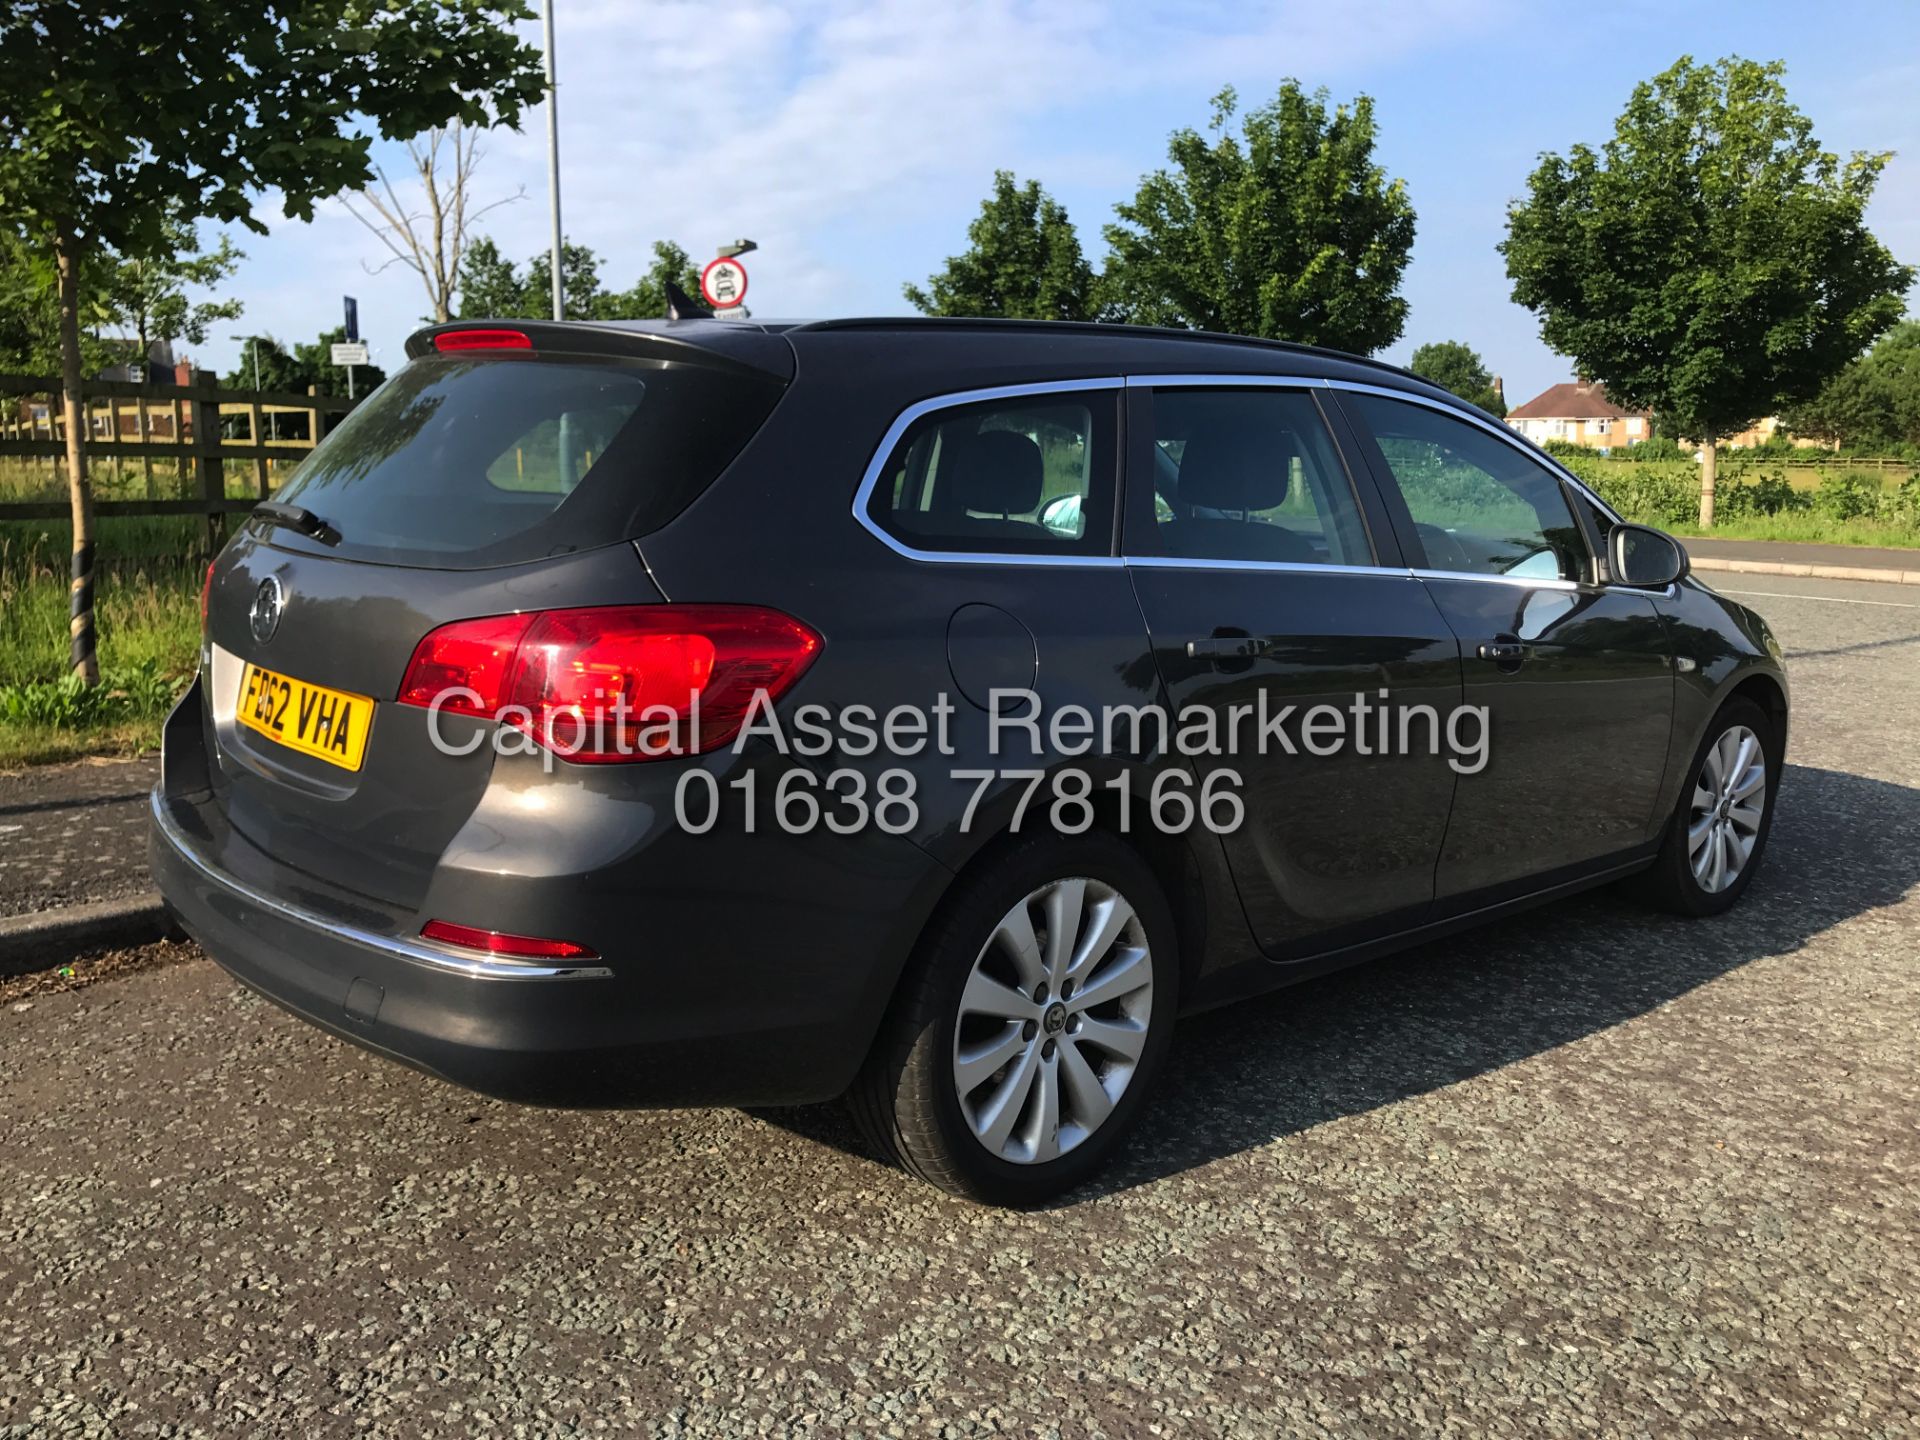 On Sale VAUXHALL ASTRA 1.3CDTI "TECH LINE" ESTATE (2013 MODEL) 1 OWNER WITH HISTORY SAT NAV AIR CON - Image 9 of 20